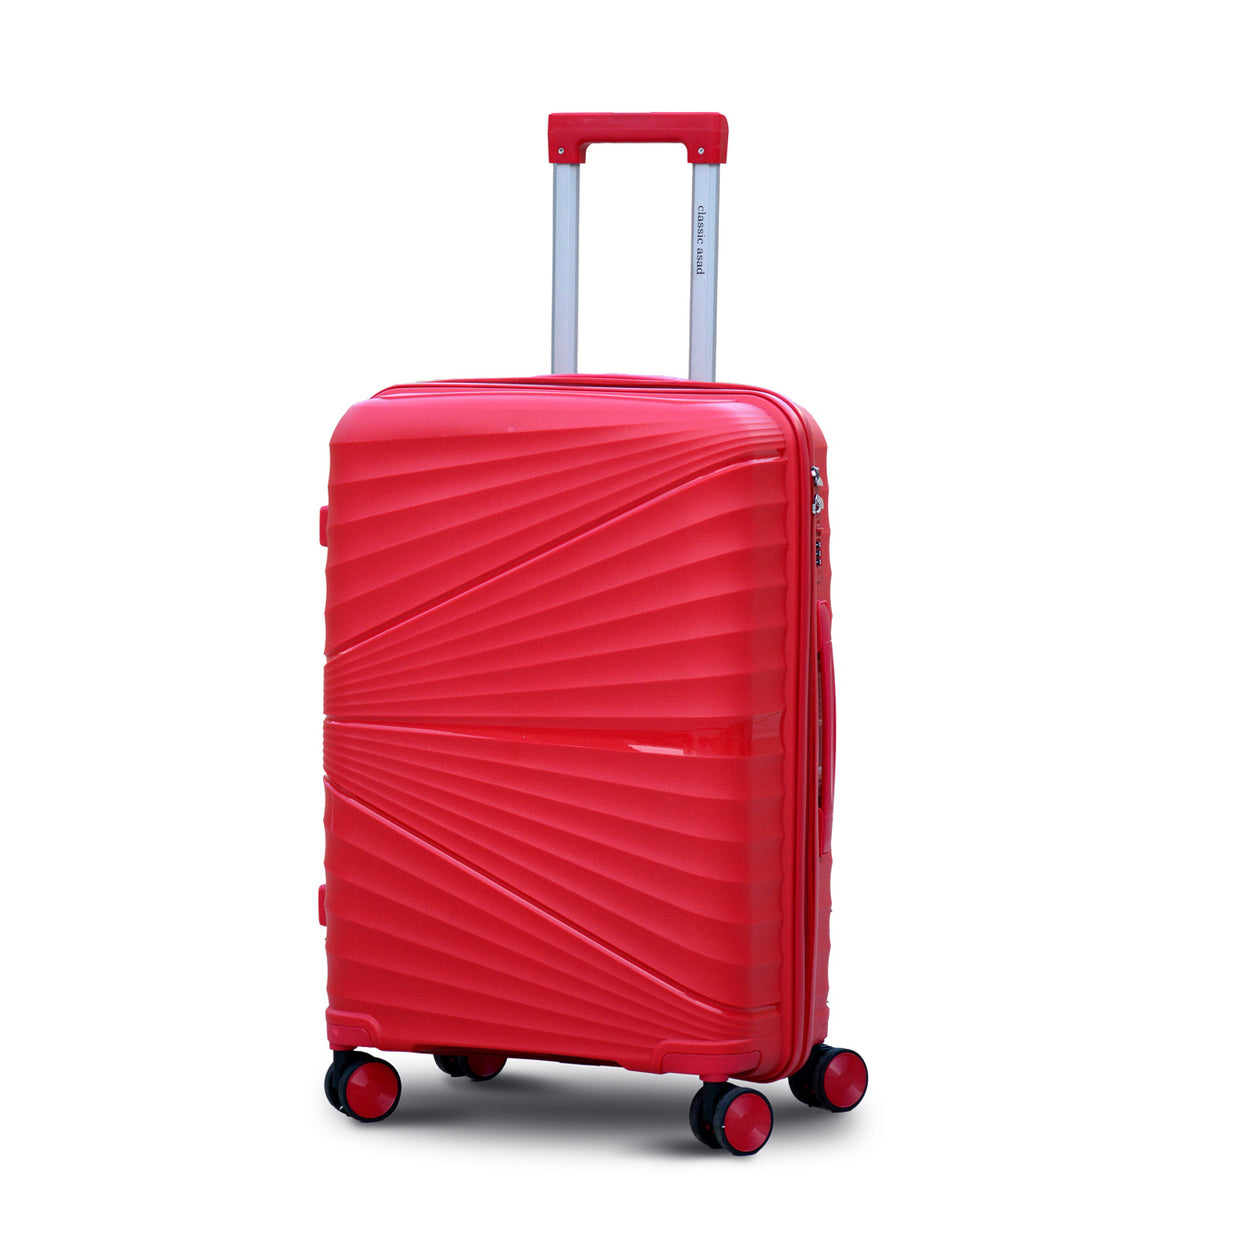 Lightweight PP Luggage Bag | 3 Pcs Set 20” 24” 28 inches | ASD PP Red